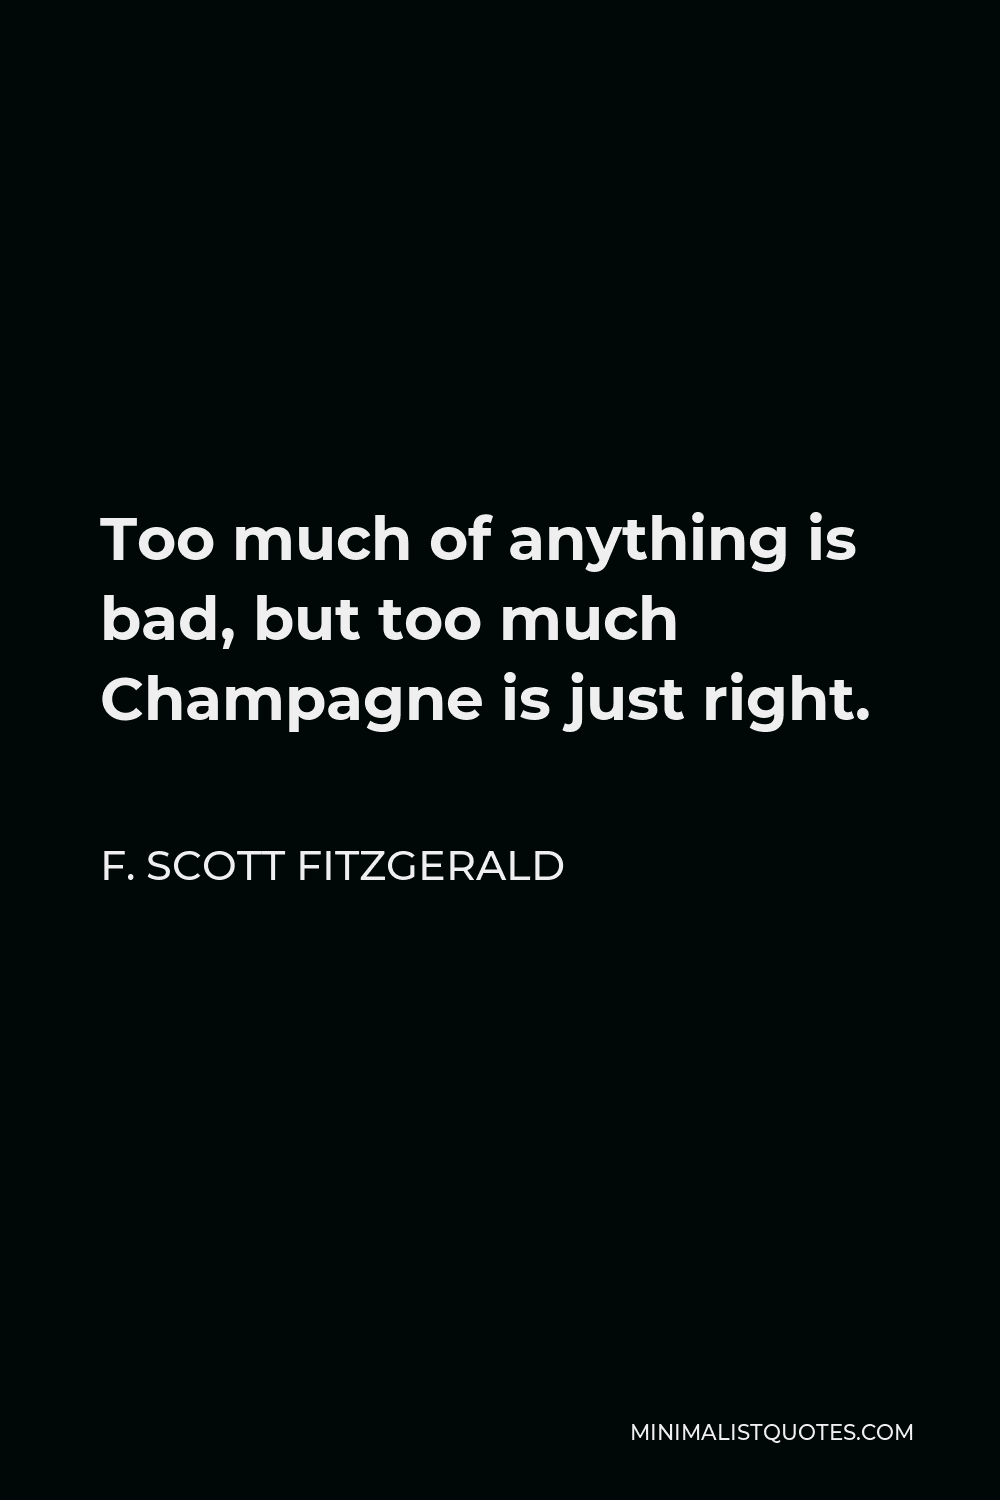 F. Scott Fitzgerald Quote - Too much of anything is bad, but too much Champagne is just right.